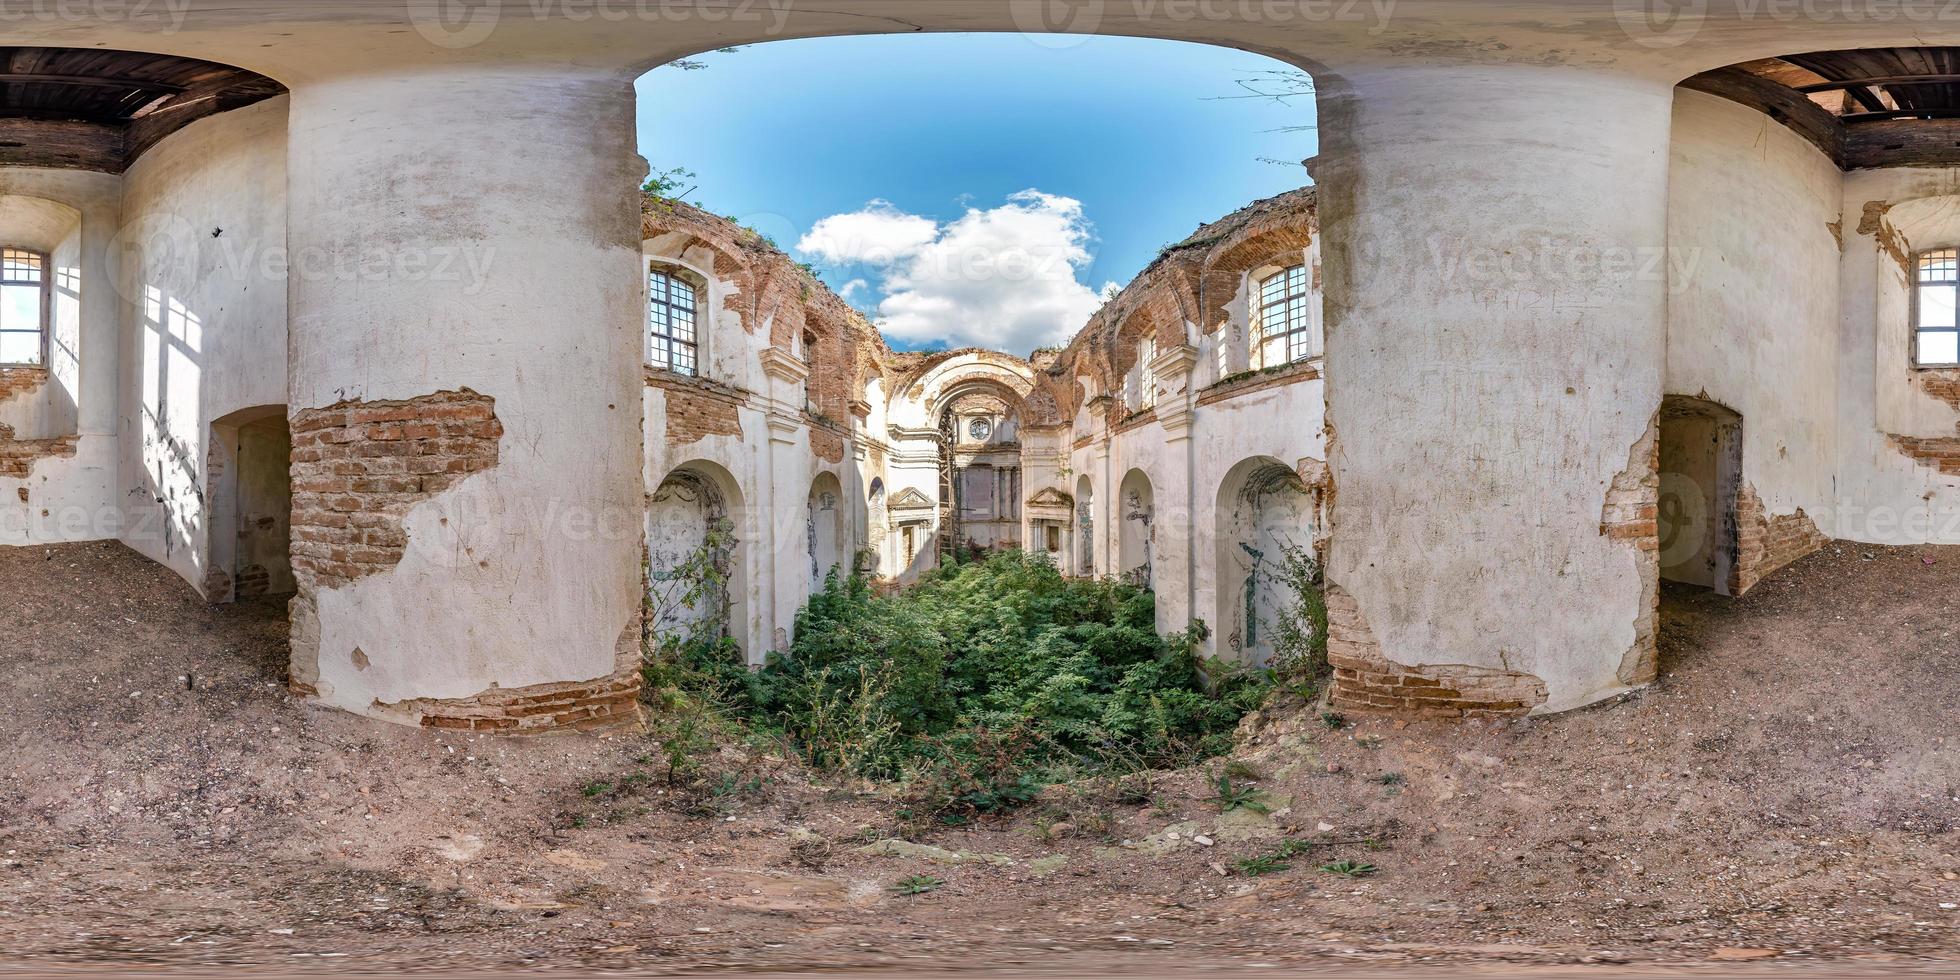 Full spherical seamless hdri panorama 360 degrees angle view inside of concrete structures of abandoned ruined building of church with bushes and trees inside in equirectangular projection, VR content photo